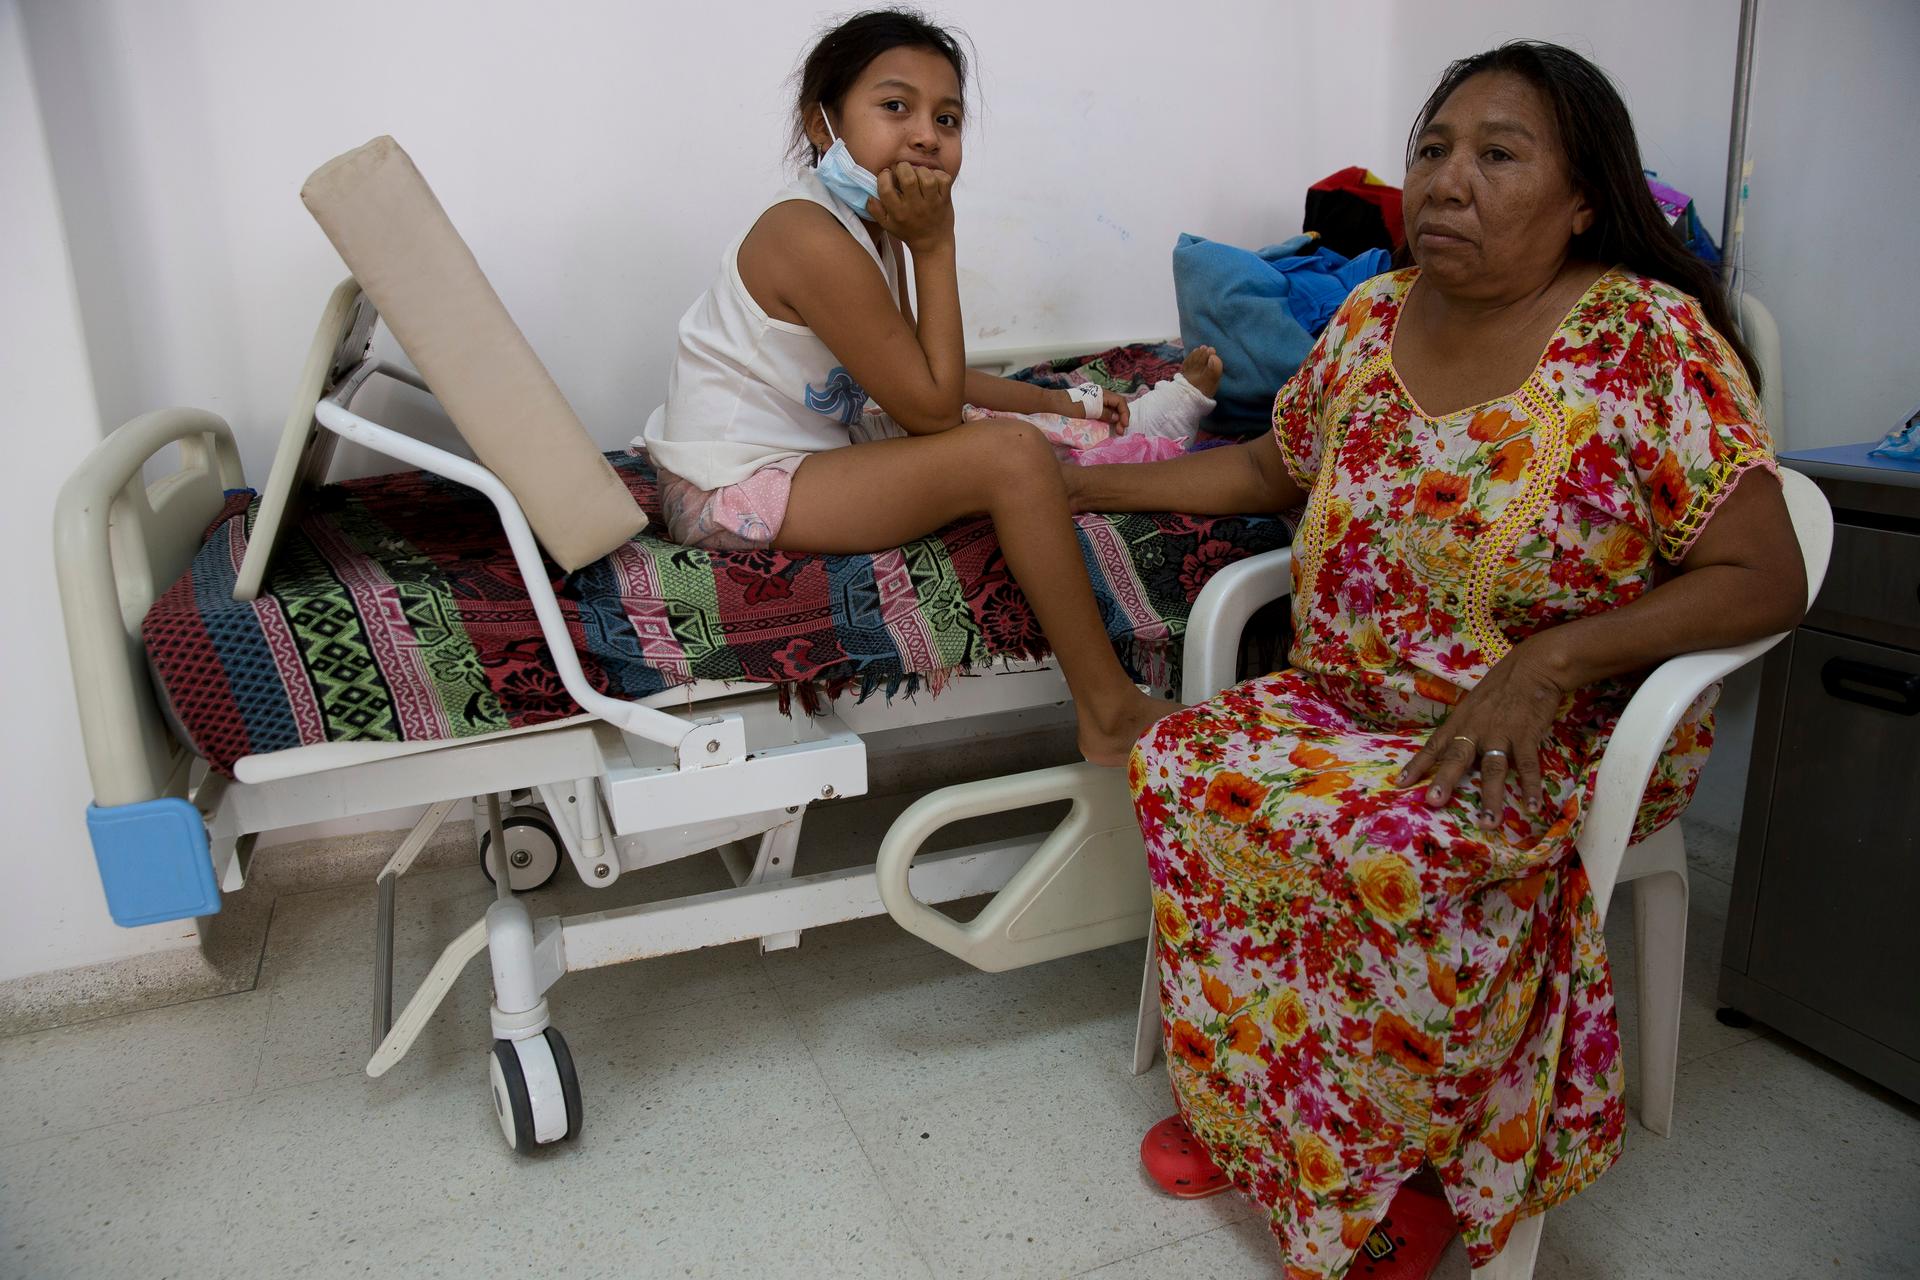 A young girl sits on a hospital bed with a fractured leg in bandages next to her mother.